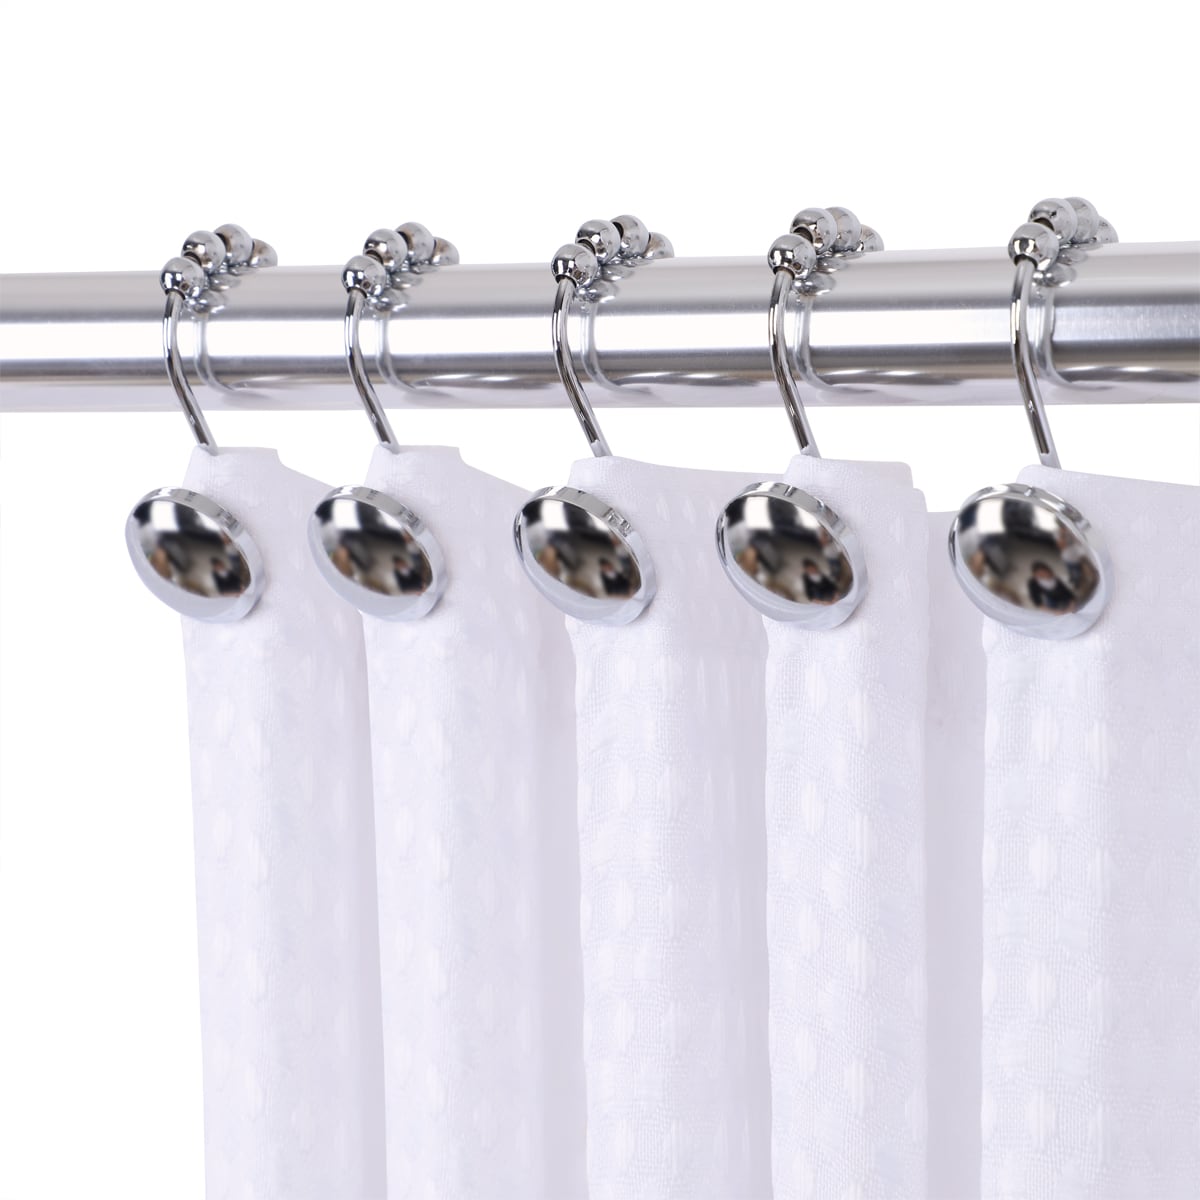 Bath Bliss 12 Pack Shower Curtain with Double Hooks - Chrome